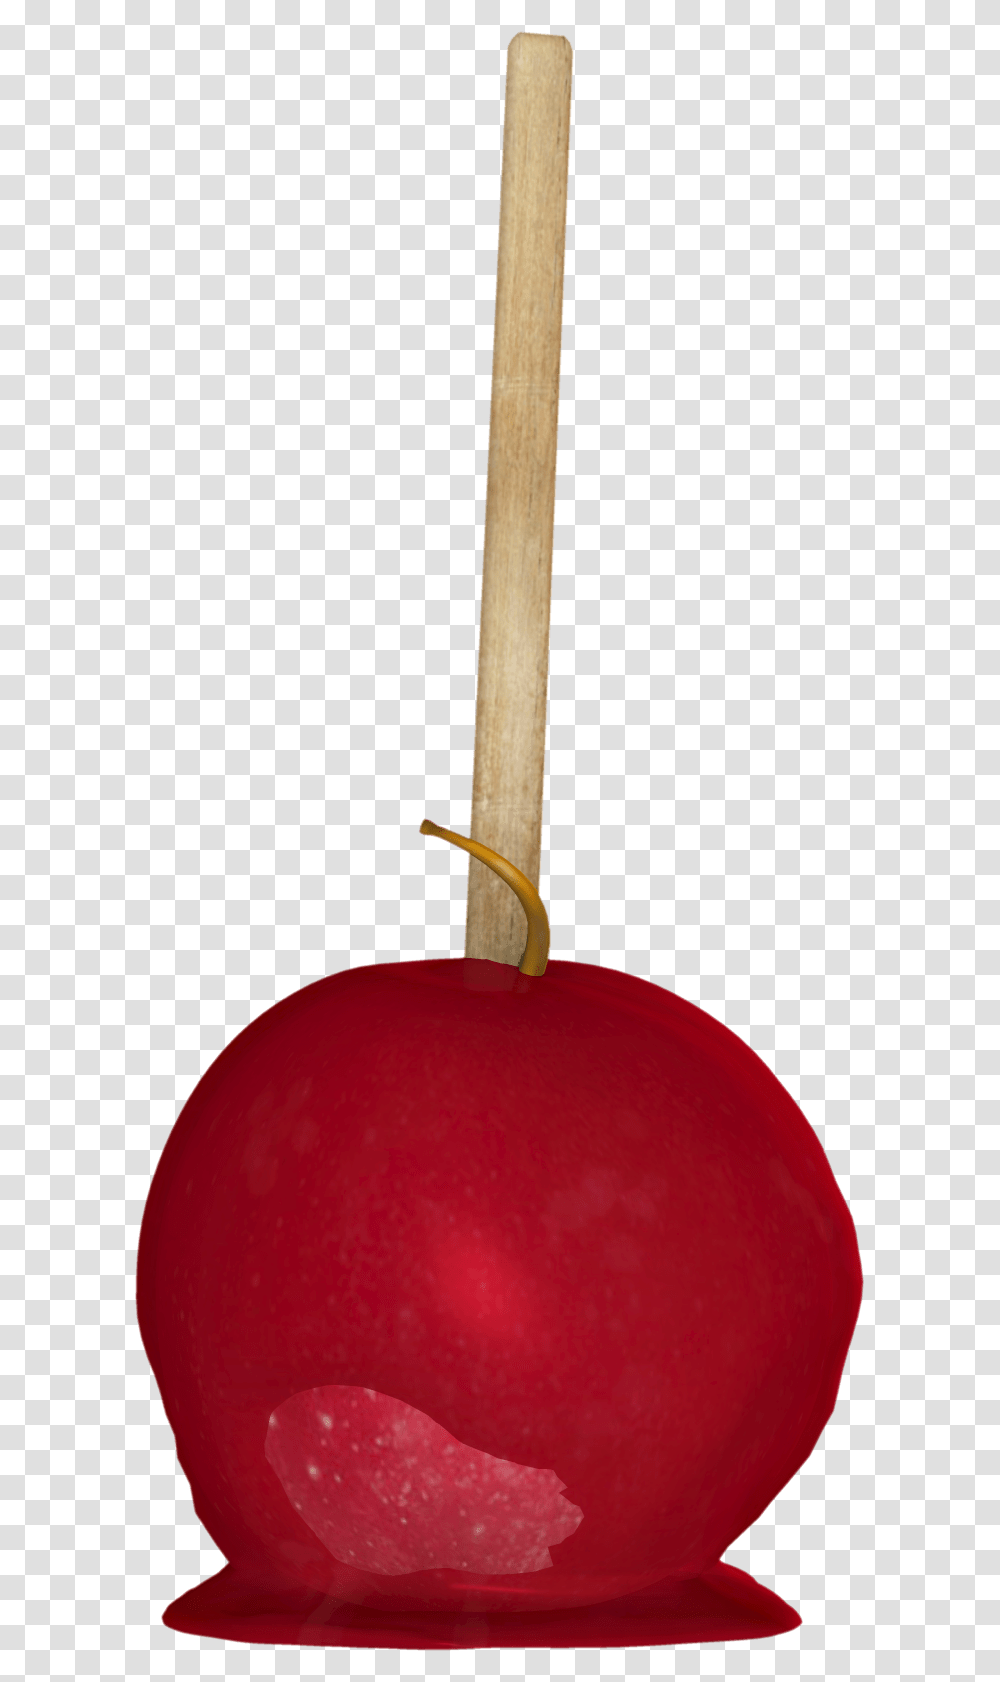 Free Caramel Apple Graphic Clipart Candy Apple, Plant, Fruit, Food, Cherry Transparent Png